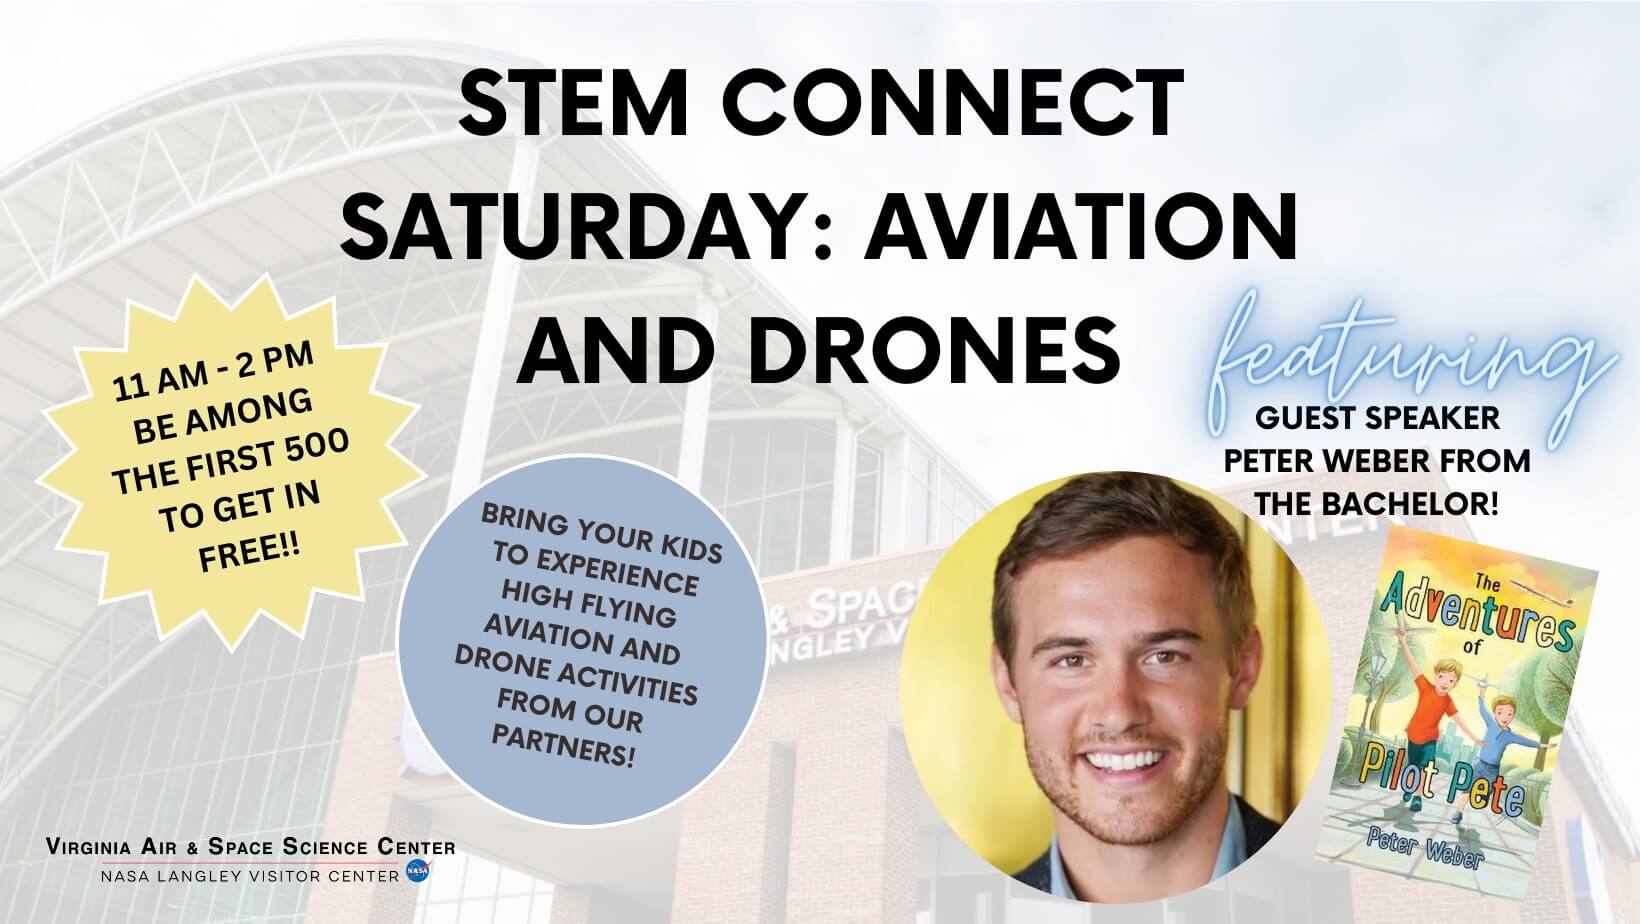 STEM Connect Saturday: Aviation and Drones featuring guest speaker Peter Weber from the Bachelor! 11 am - 2 pm be among the first 500 to get in free!! Bring your kids to experience high flying aviation and drone activities from our partners.